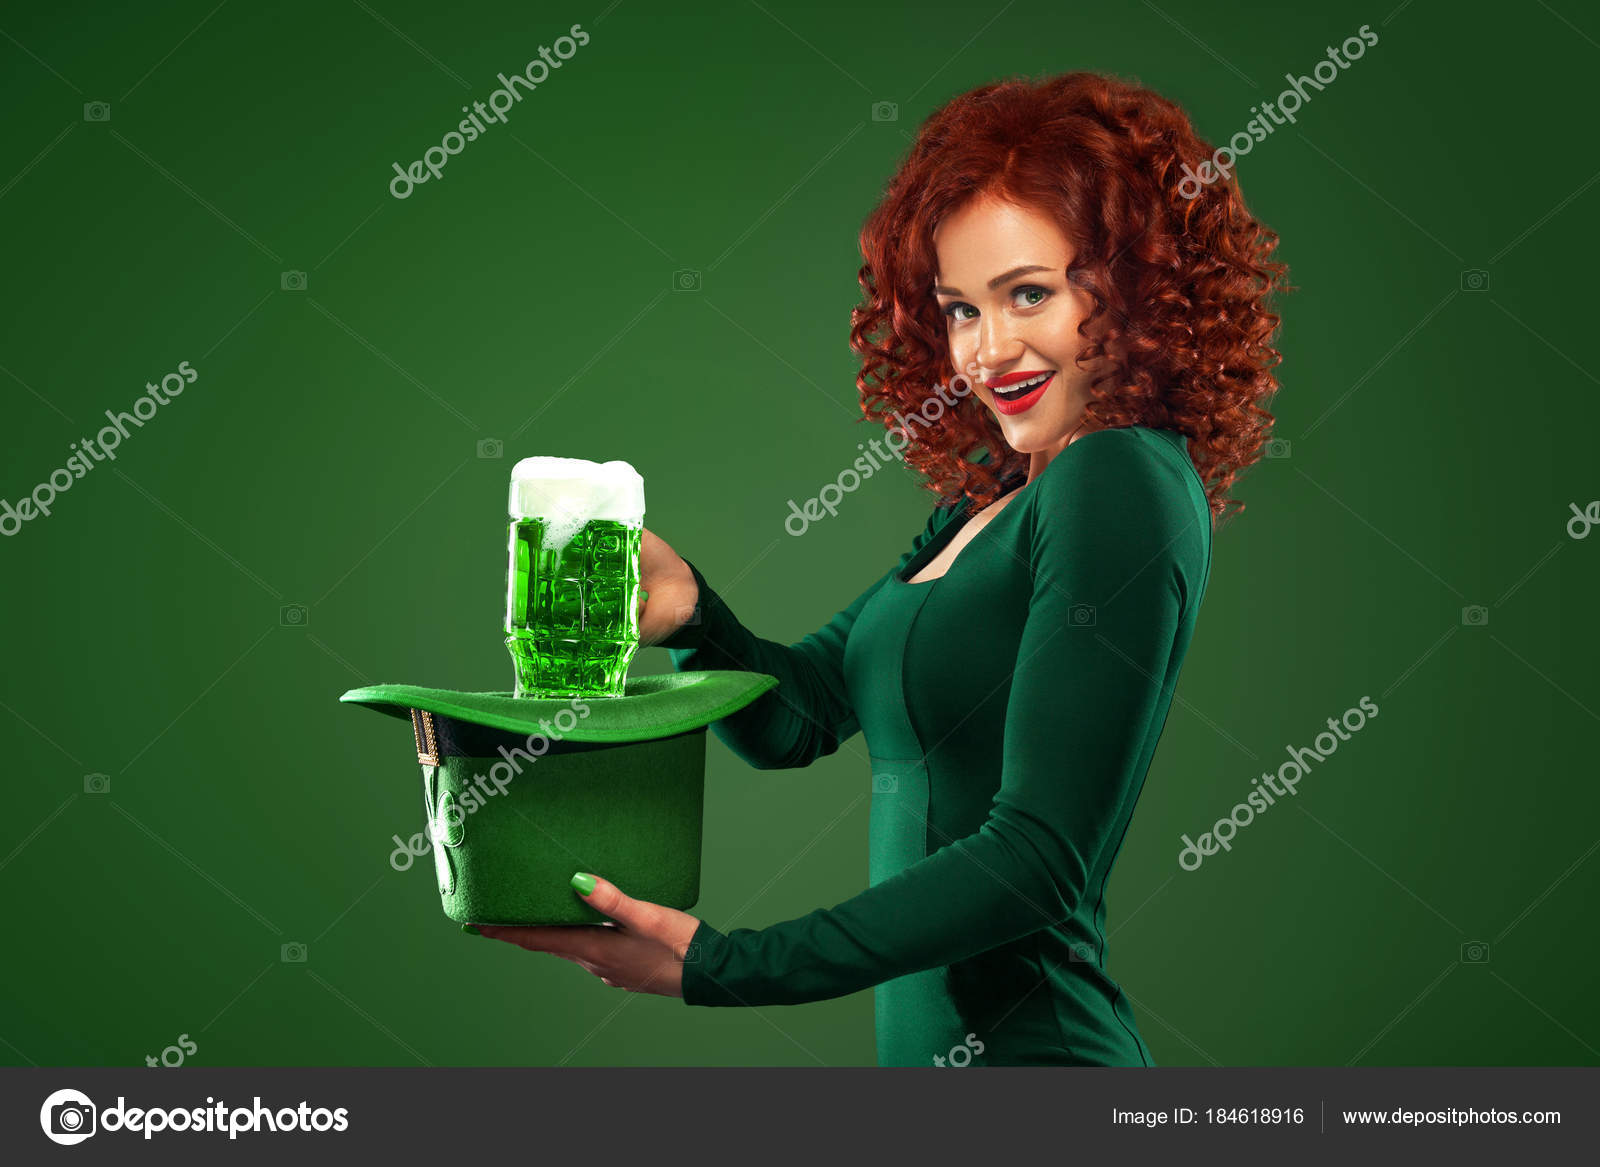 St Patricks Day Sex Parties - Saint patricks day breasts - Porn pictures